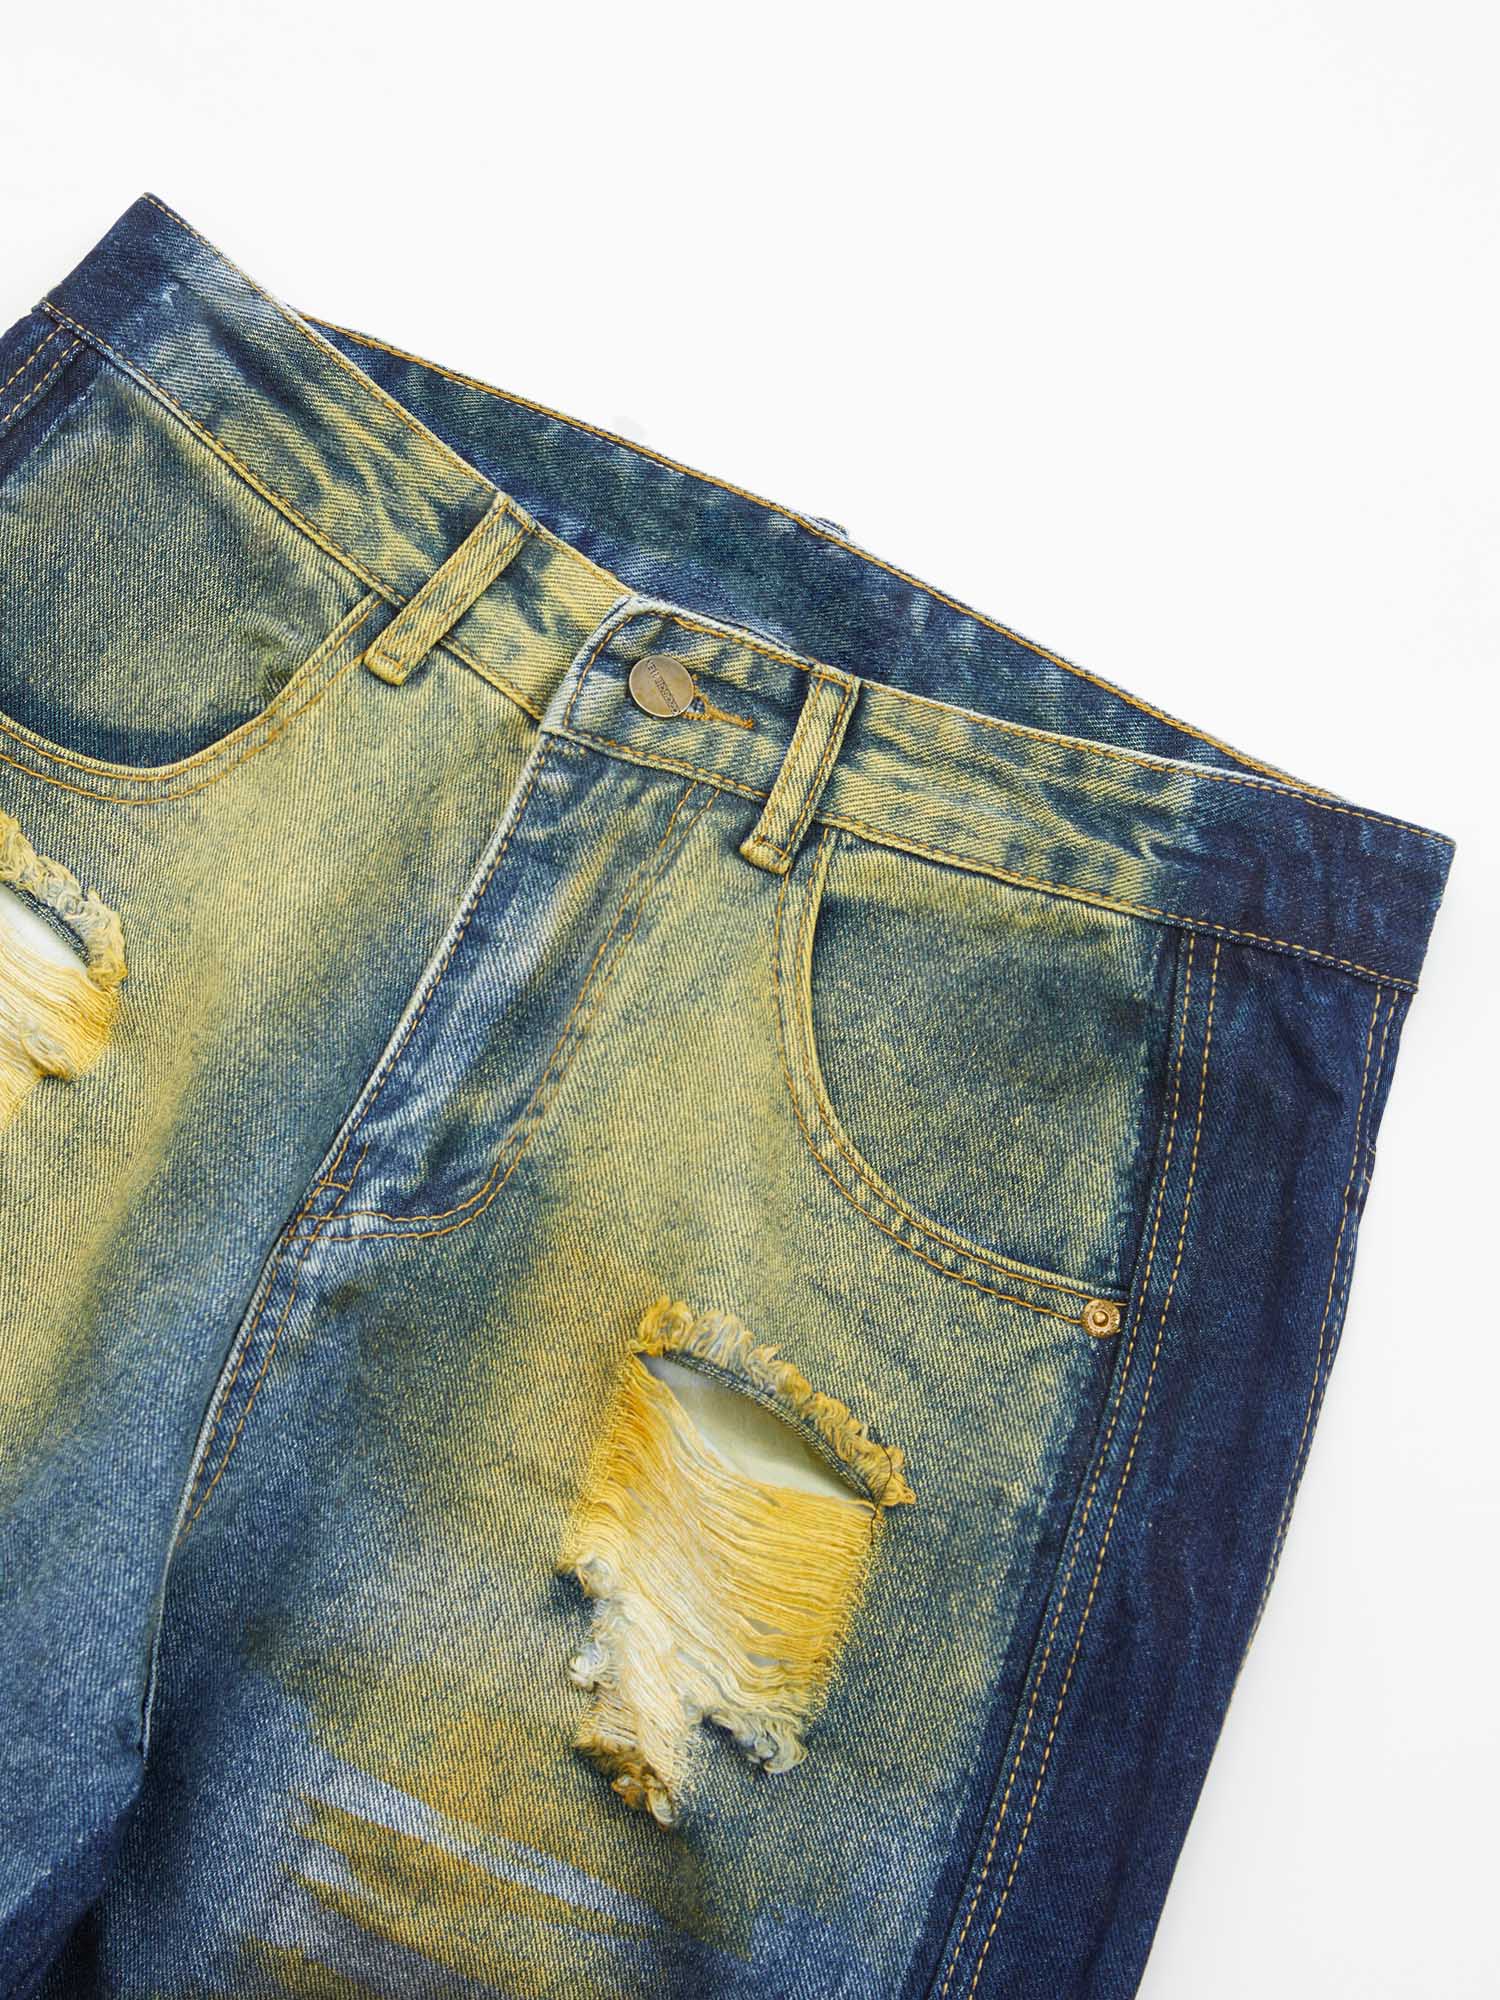 Thesupermade Hip-hop Washed Distressed Loose Spray-dyed Jeans